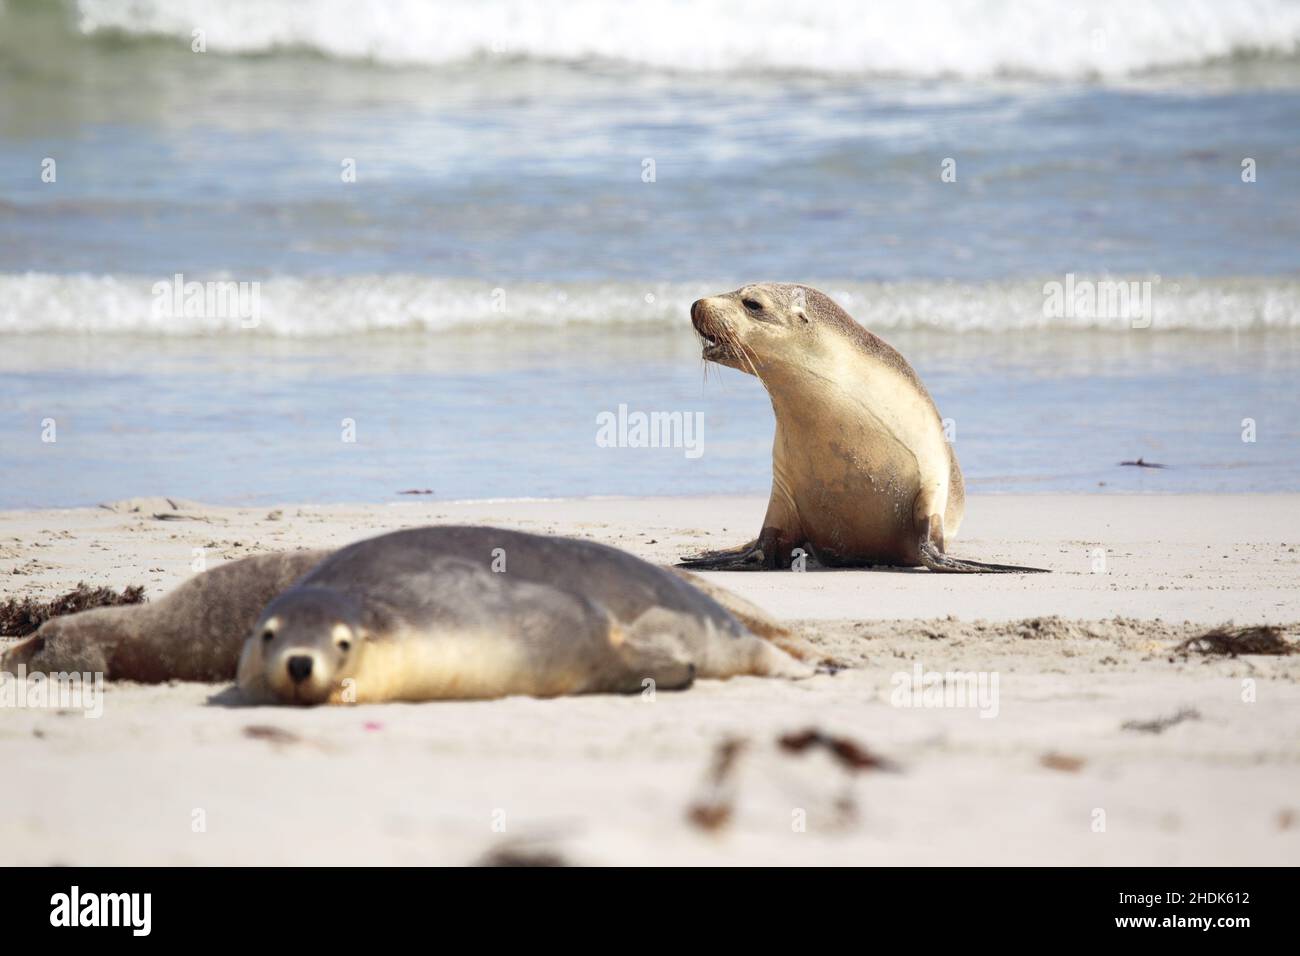 young animal, eared seals, shouting, young animals, scream, screaming, shout Stock Photo